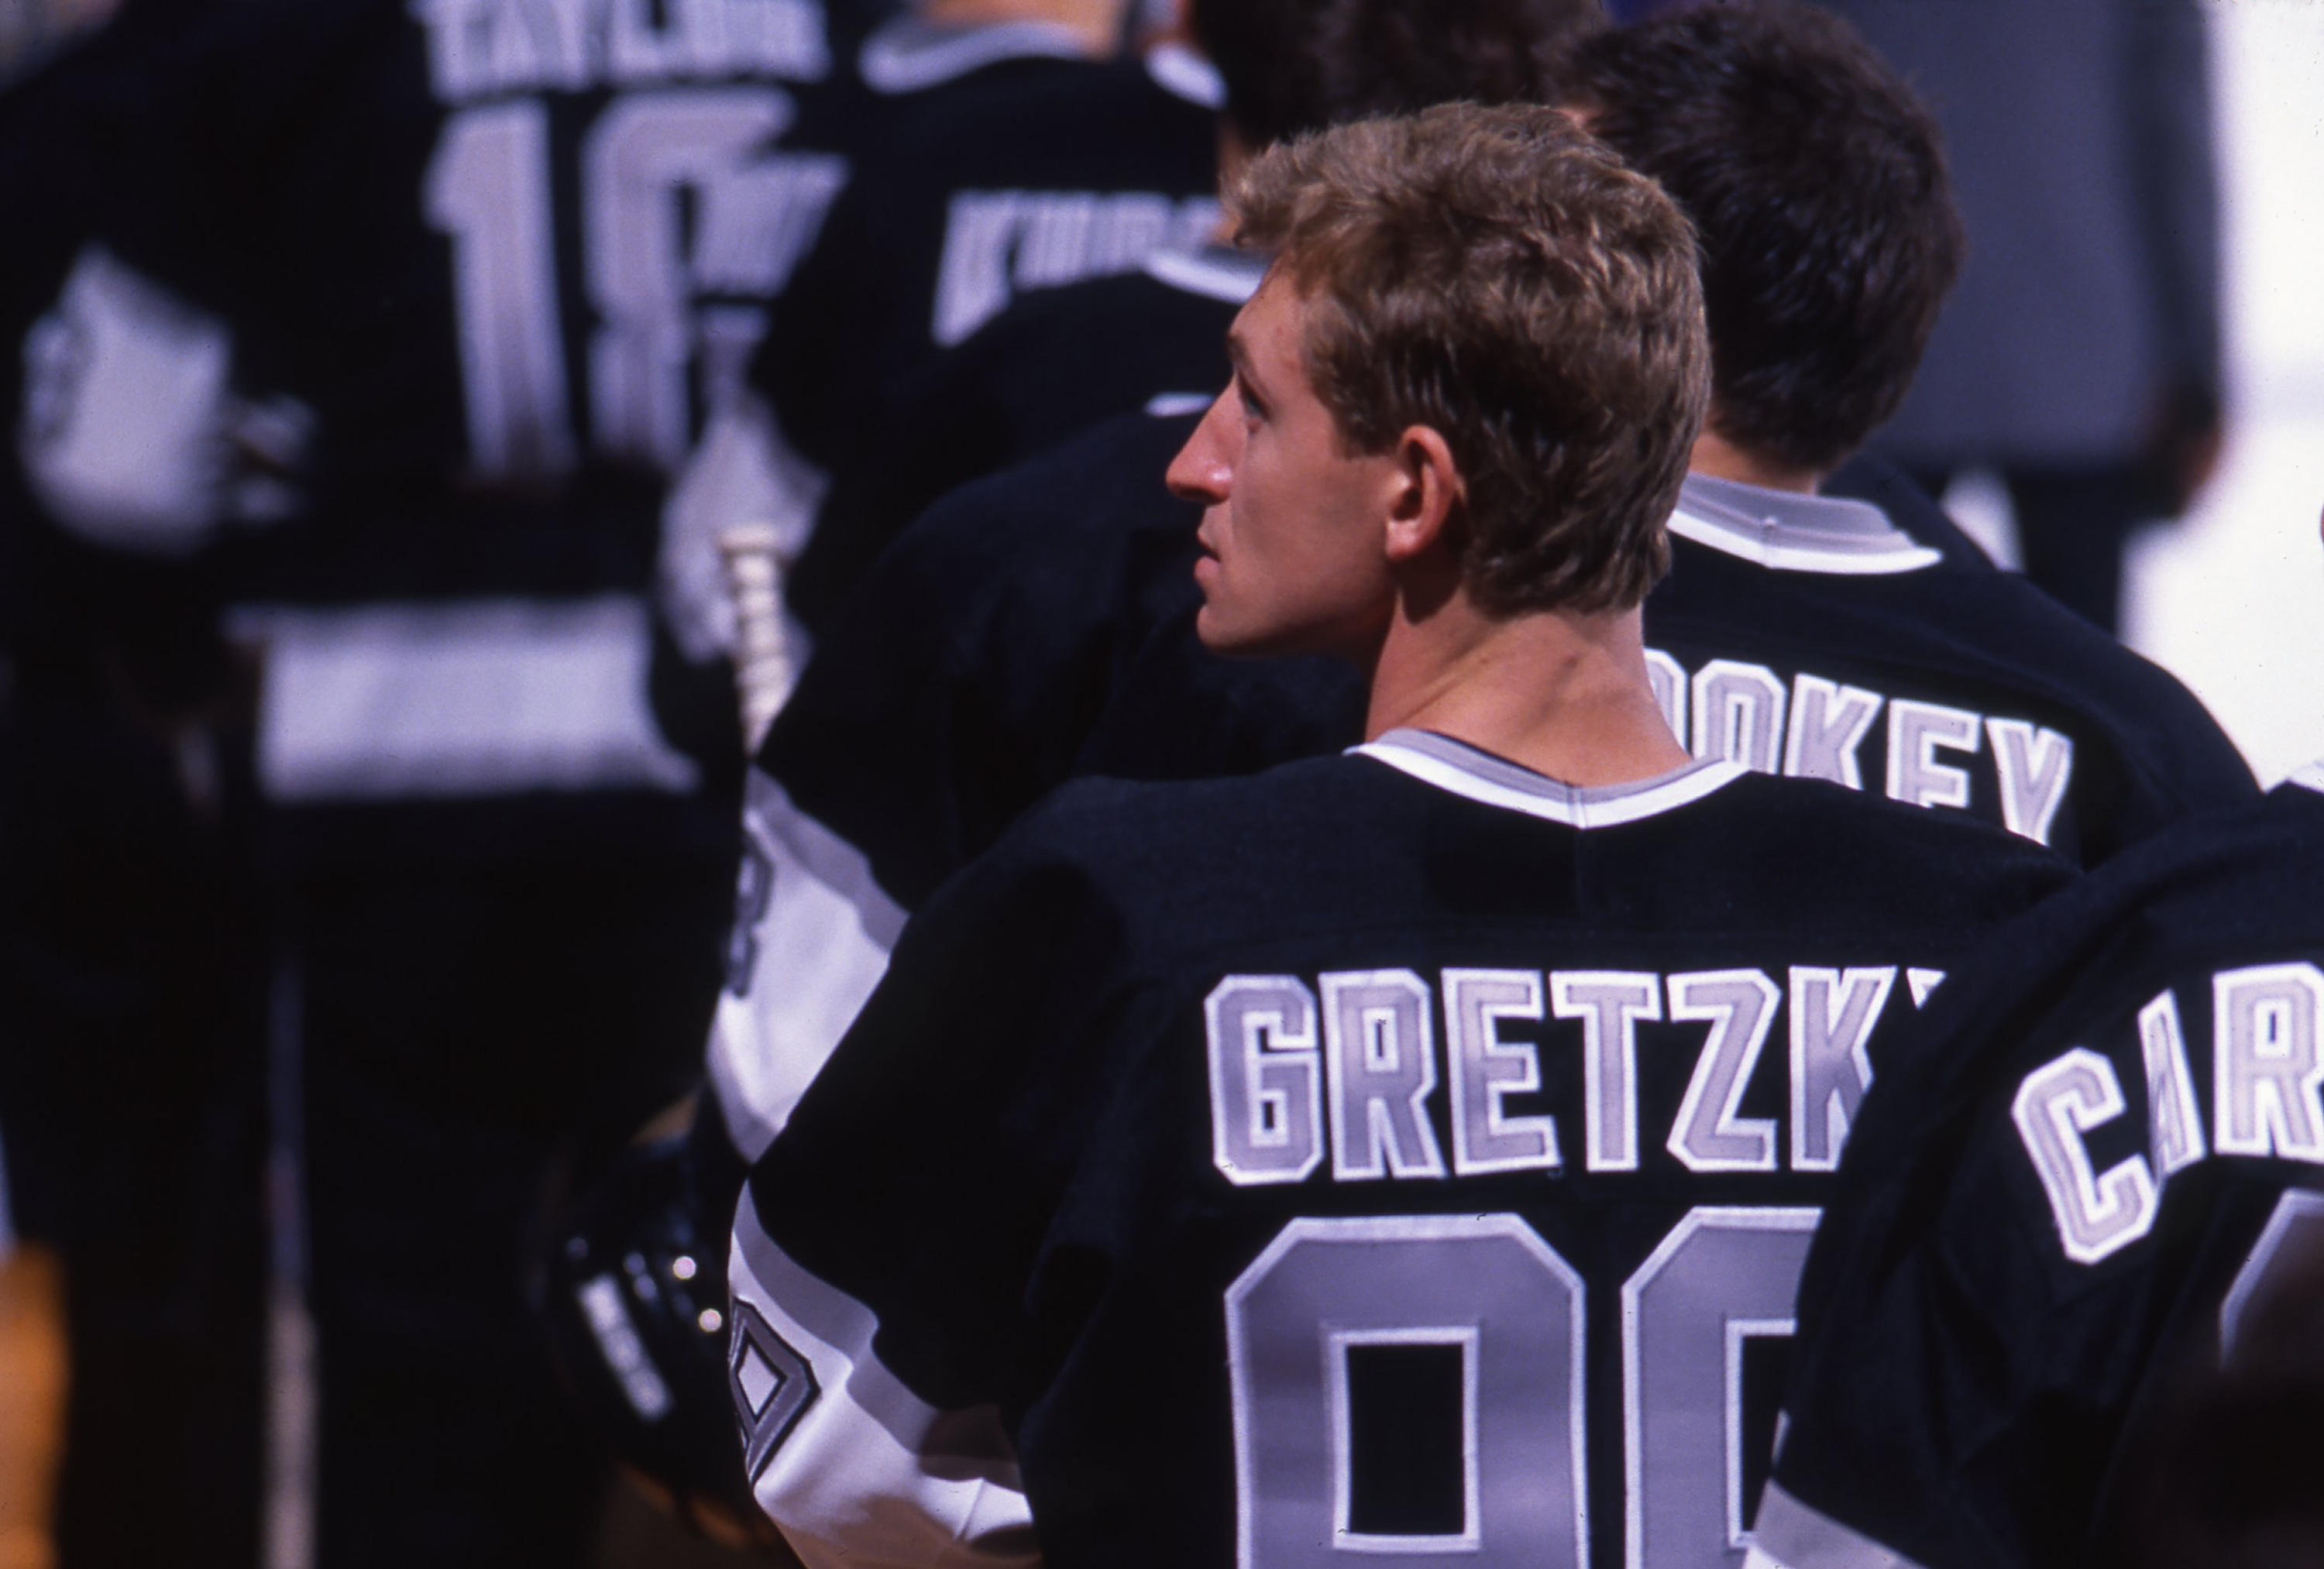 Wayne Gretzky #99 of the Los Angeles Kings at his first home pre-season game on September 28, 1988 at the Great Western Forum in Inglewood, California.